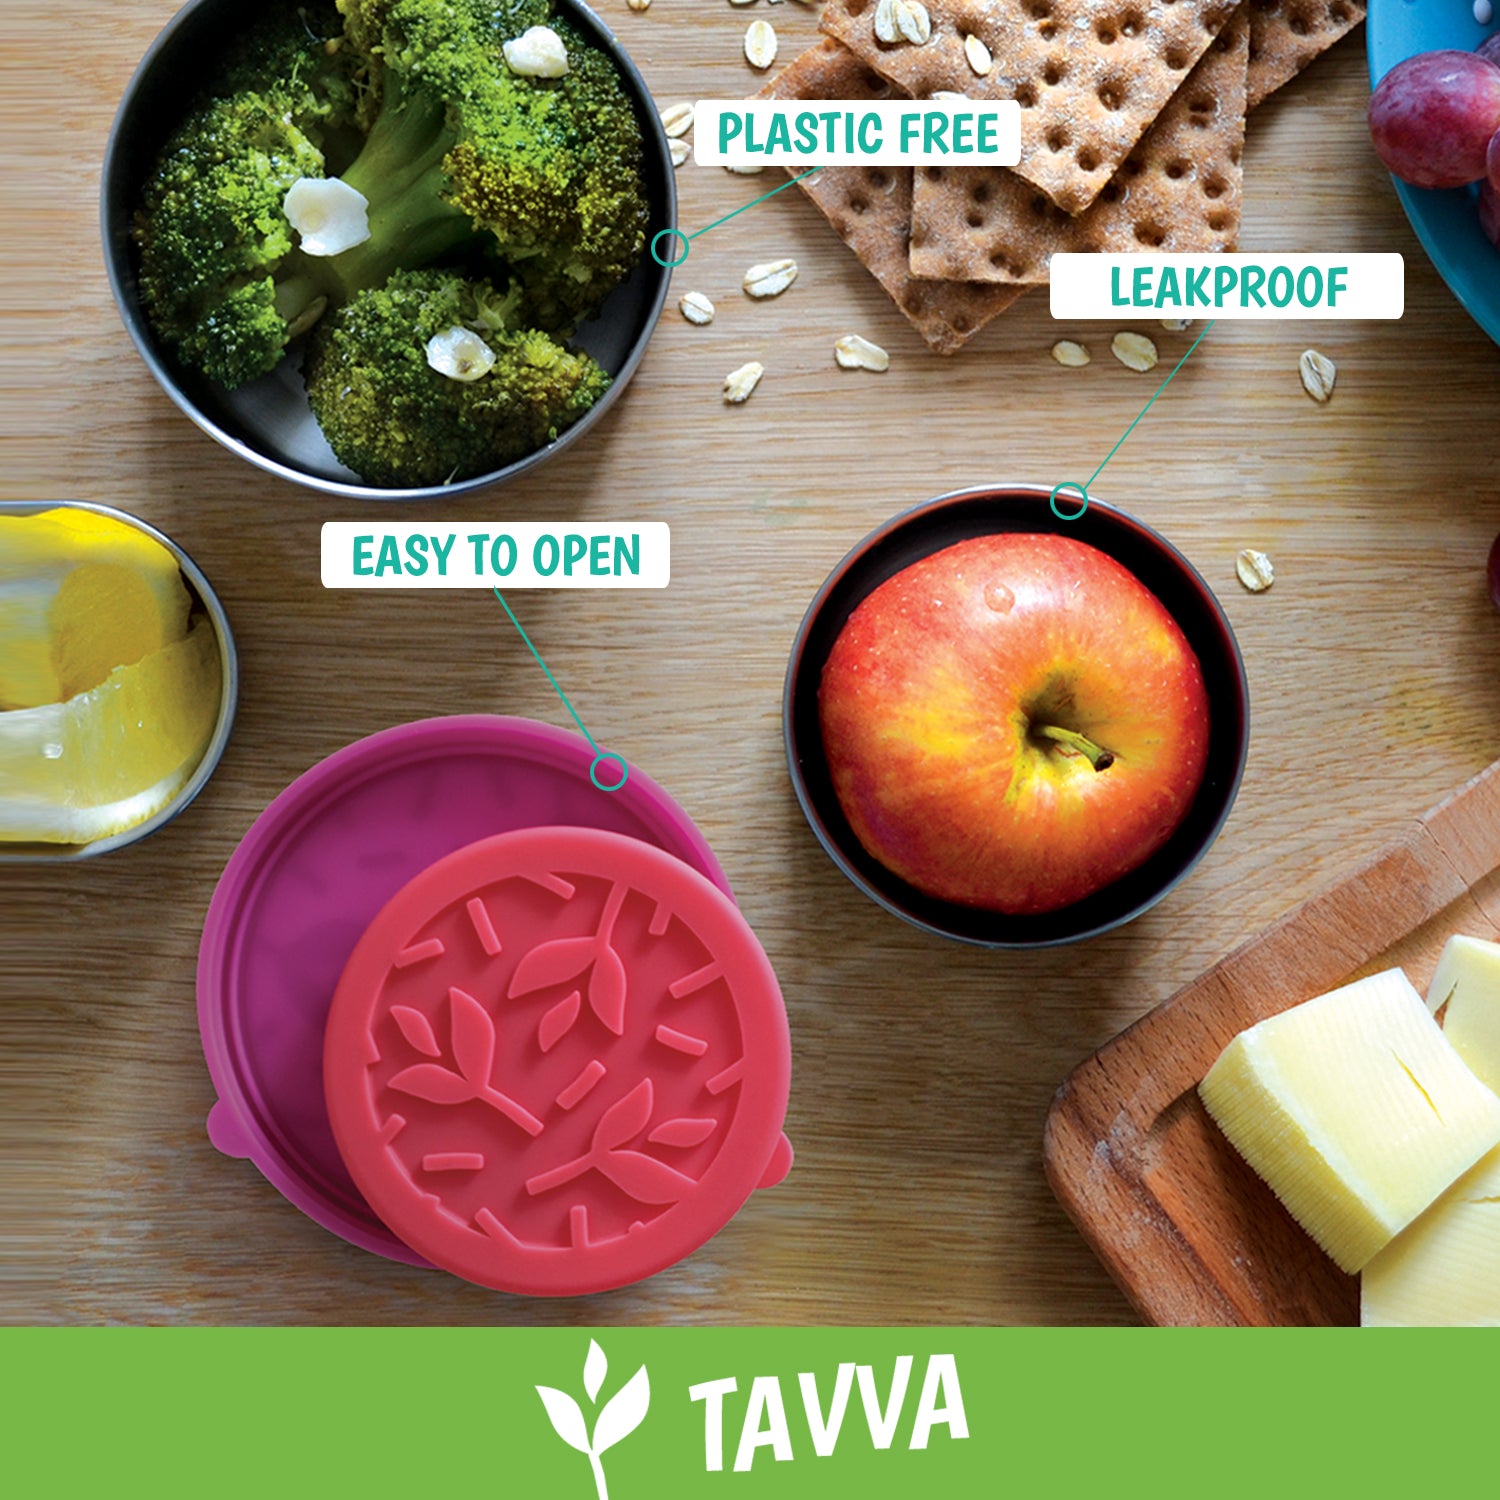 Tavva Dips 3x1.7 oz Stainless Steel Containers Set